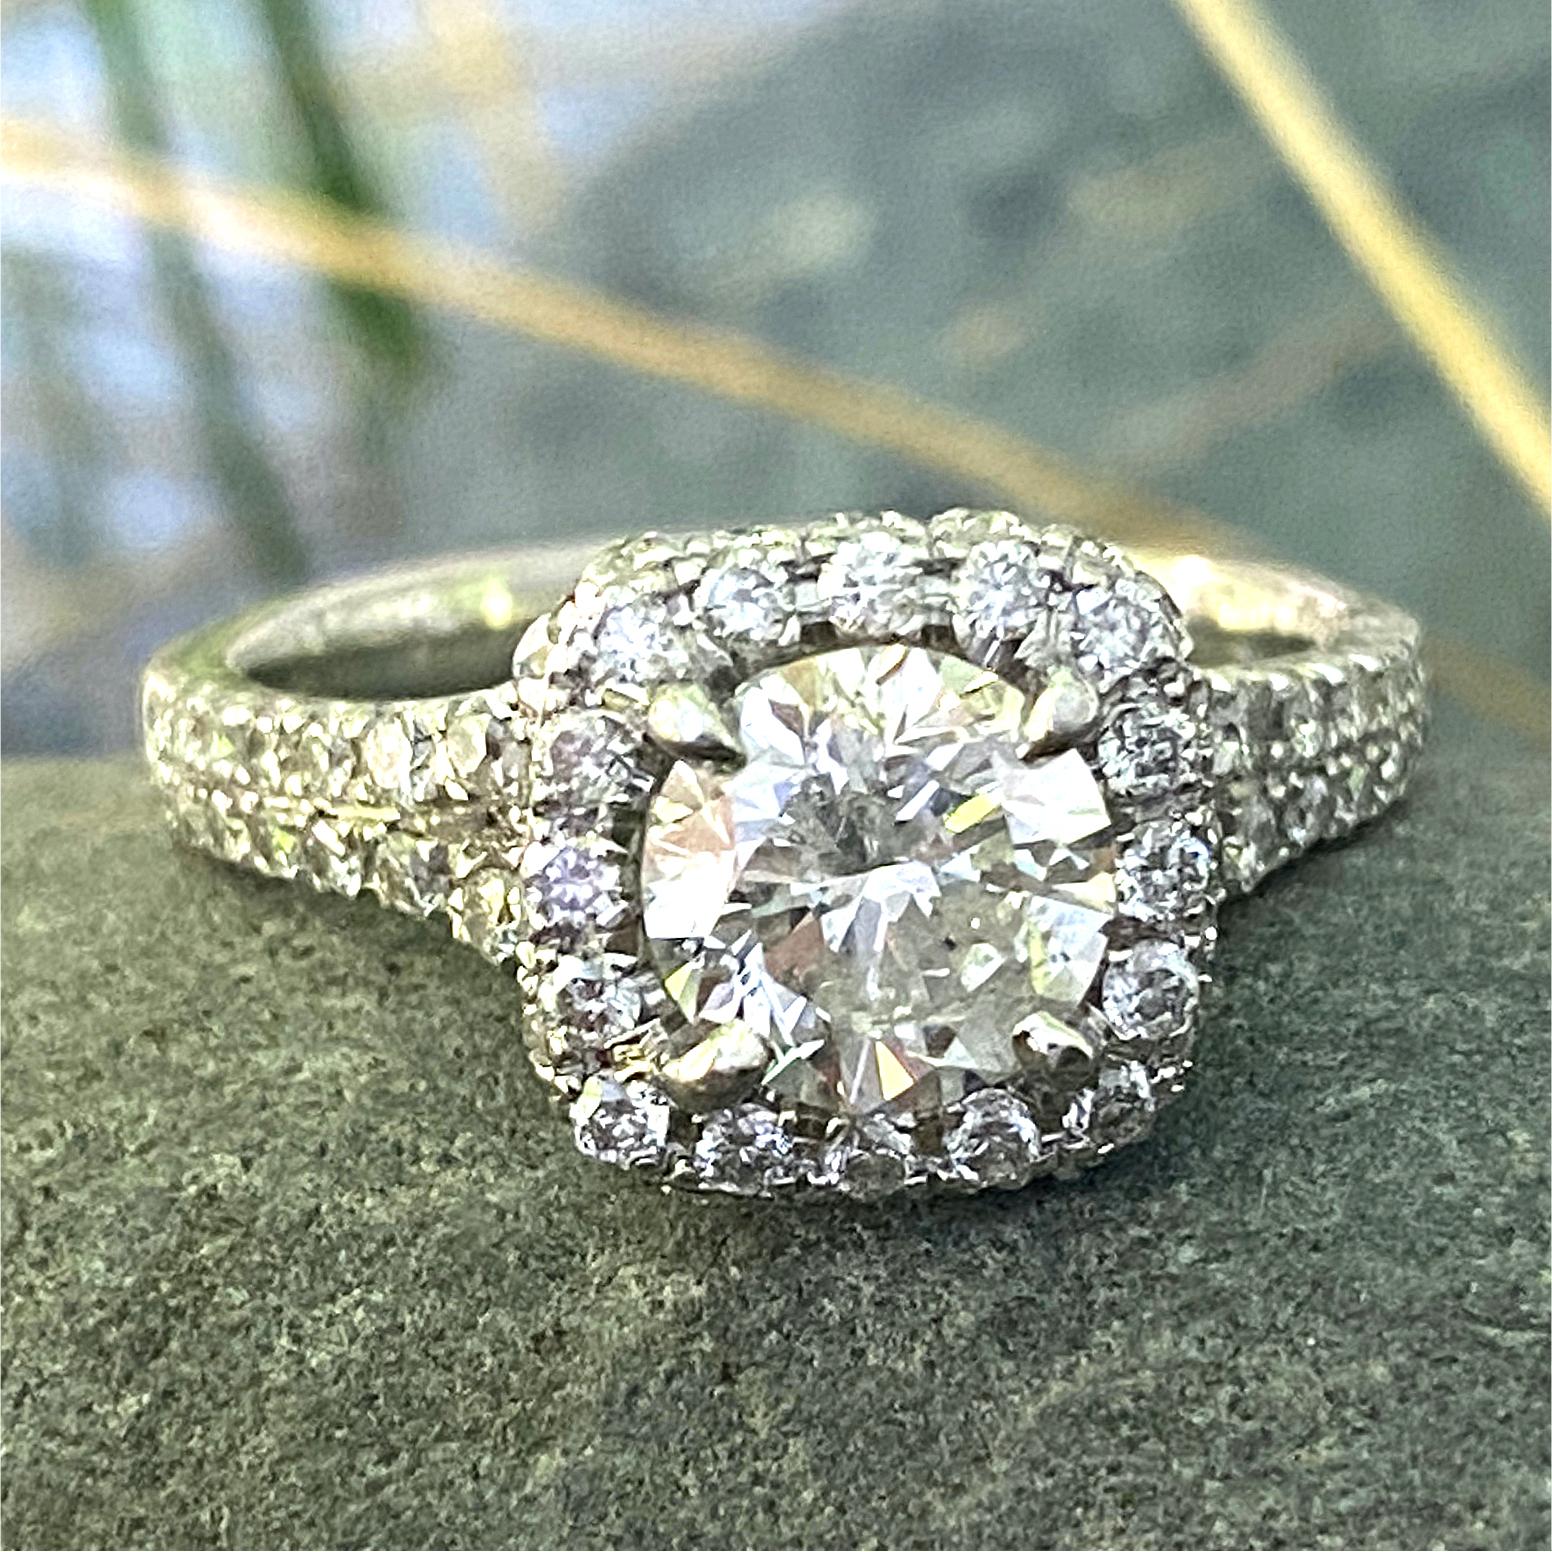 A bright round diamond gets the sparkling setting it deserves with this beautiful soft square halo ring by Eytan Brandes.  

Split shoulders create a bit of openwork interest on the sides and enhance a clean line from the face of the ring, to the